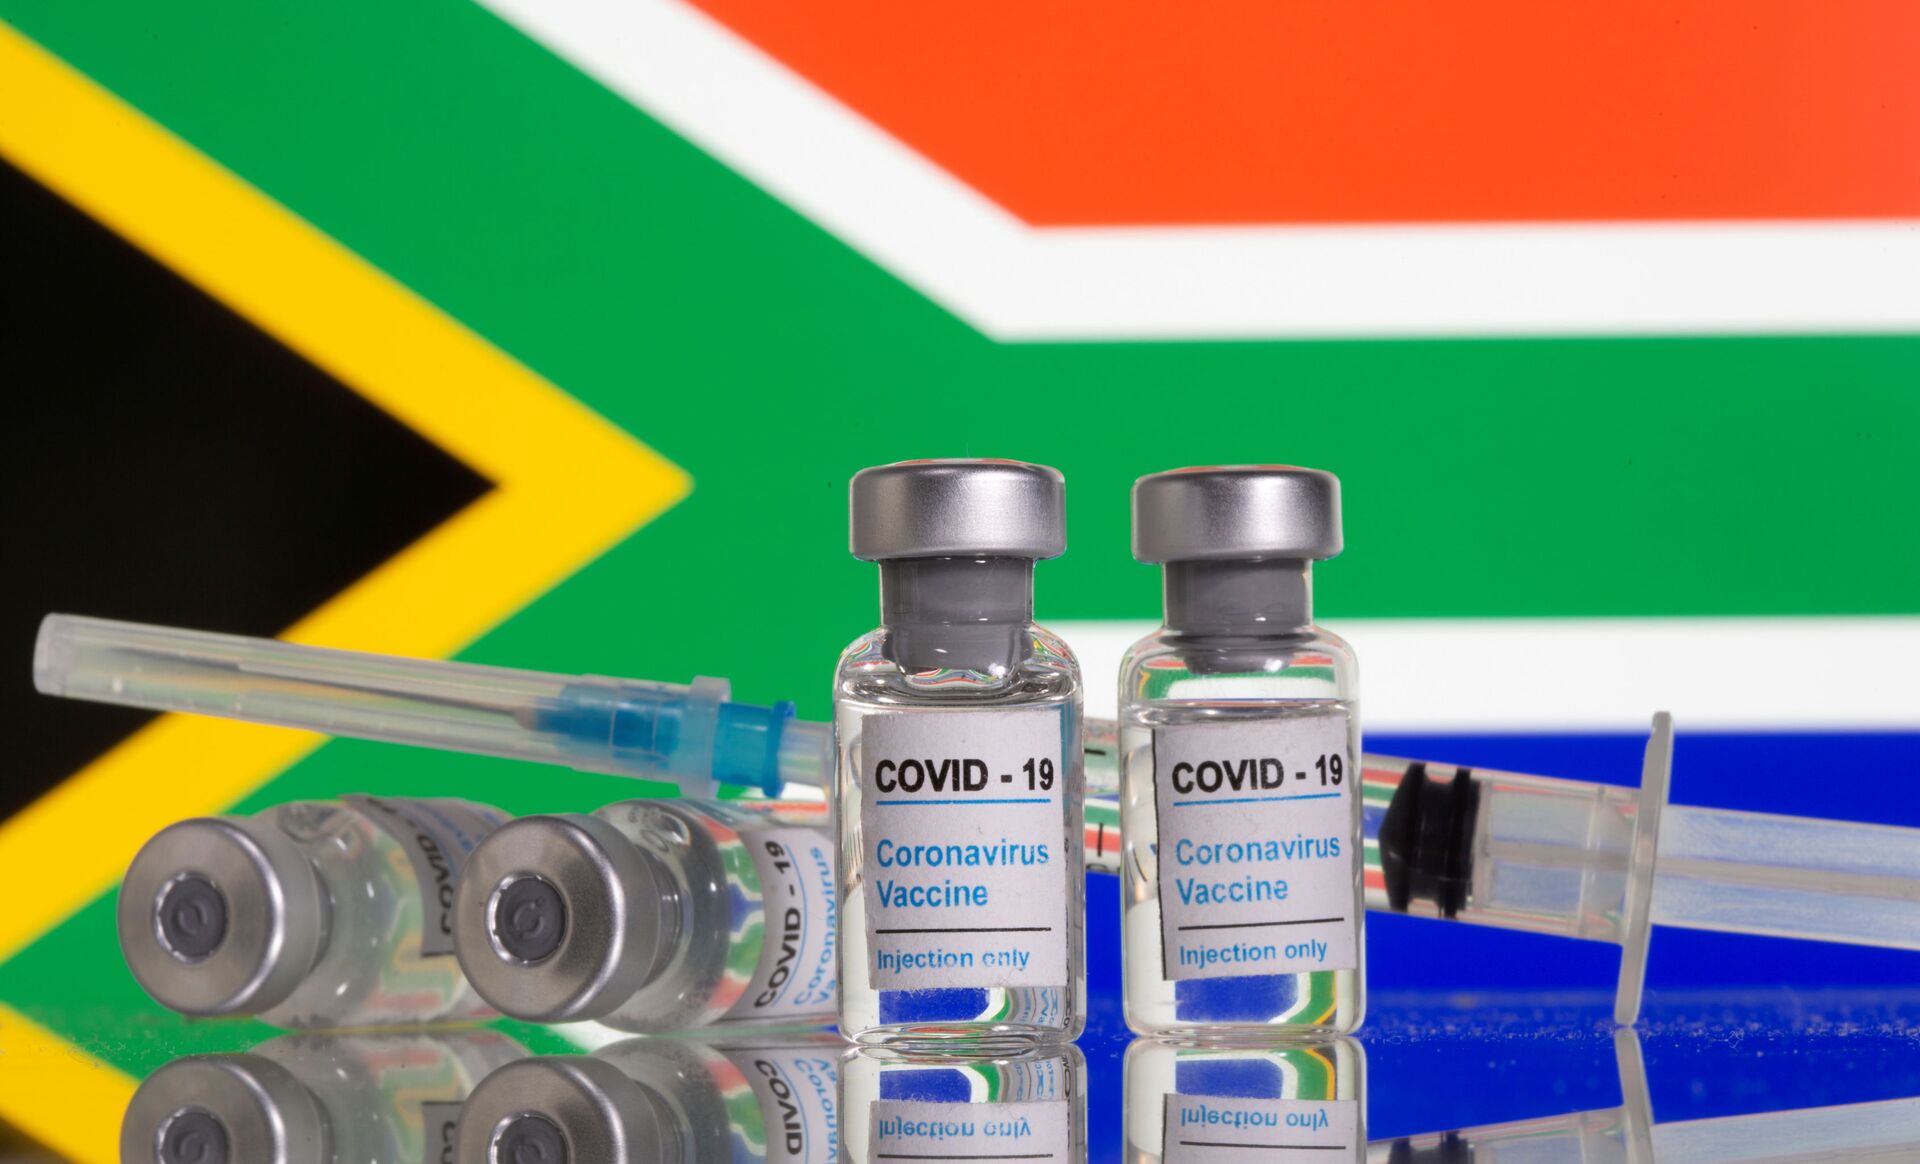 FILE PHOTO: Vials labelled COVID-19 Coronavirus Vaccine and sryinge are seen in front of displayed South Africa flag in this illustration - Sputnik International, 1920, 27.11.2021